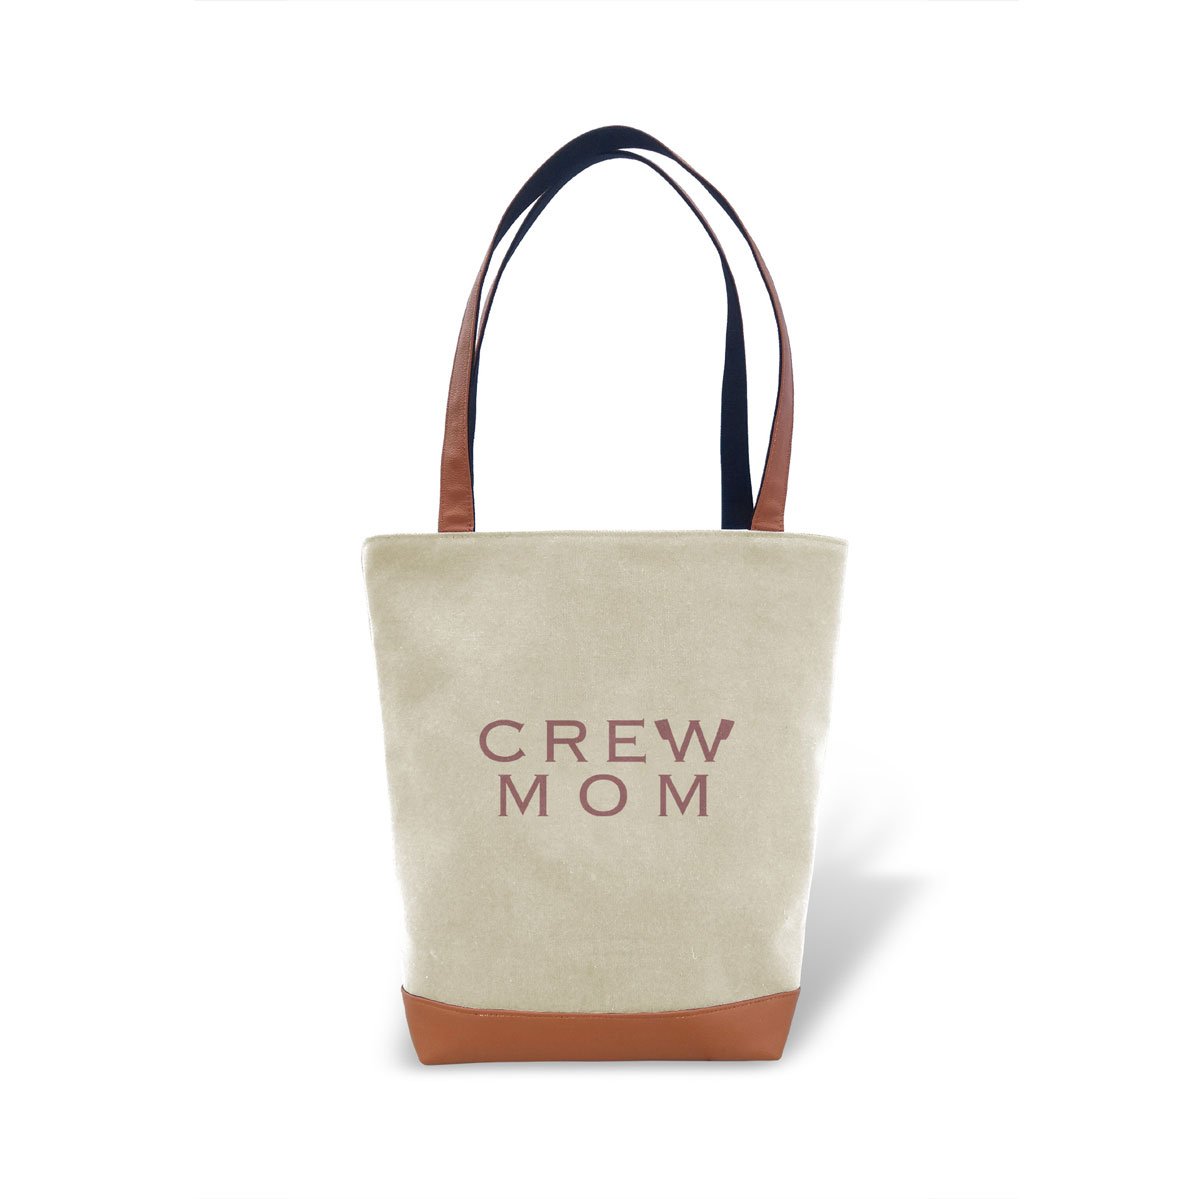 Tote Bag - Rowing Crew Mom - Strokeside Designs Rowing jewelry- Rowing Gifts Ideas- Rowing Coach Gifts